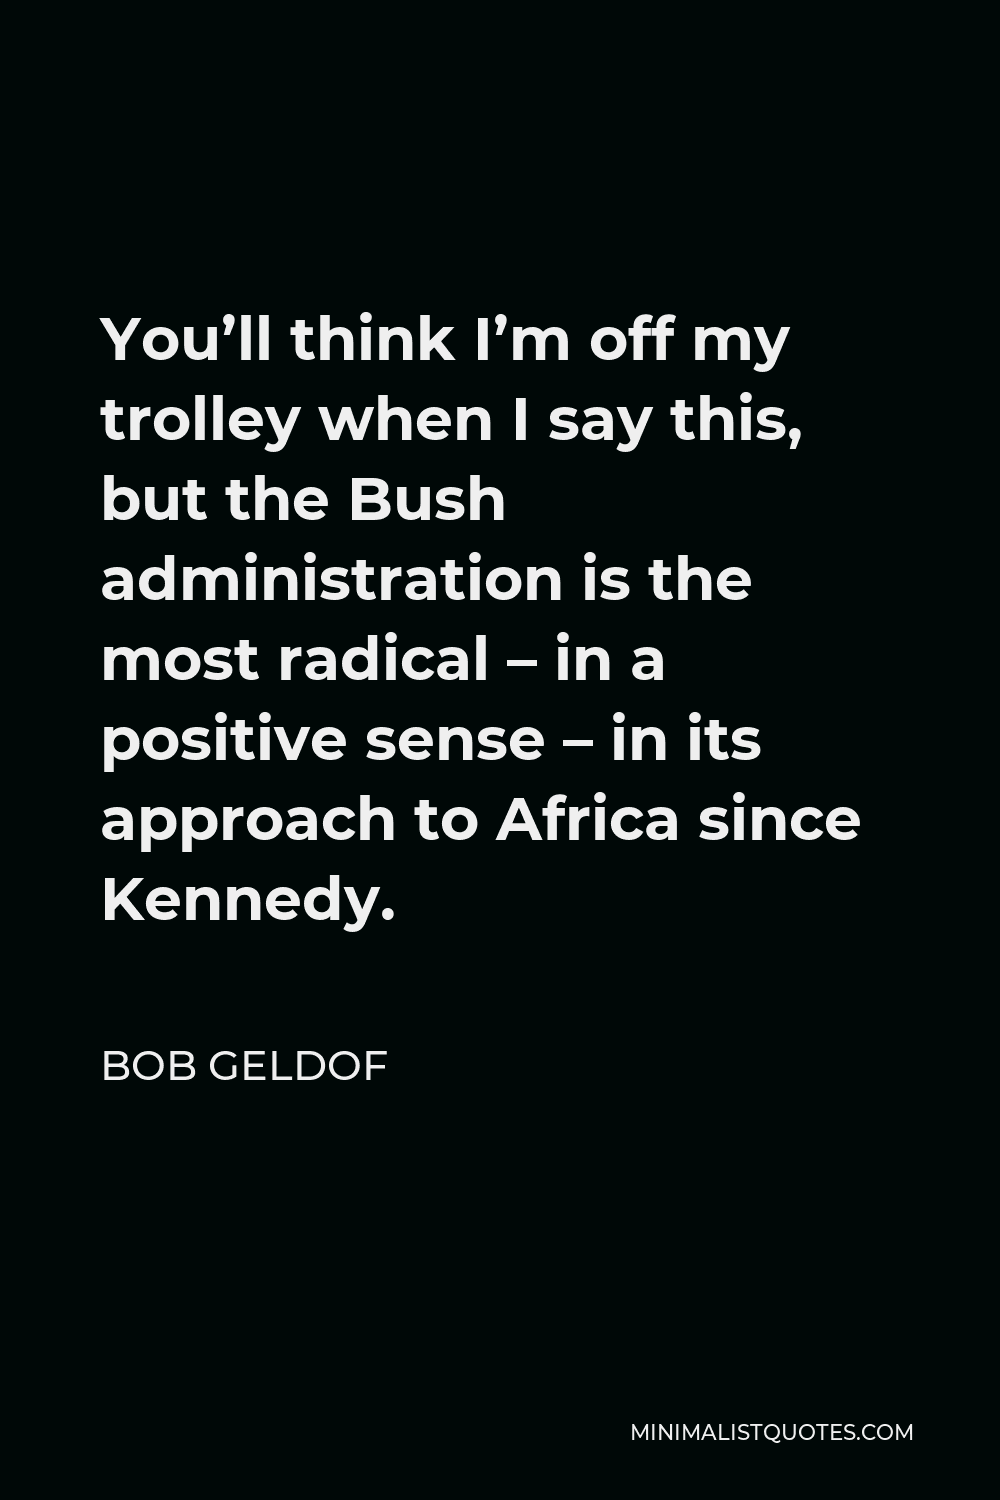 Bob Geldof Quote - You’ll think I’m off my trolley when I say this, but the Bush administration is the most radical – in a positive sense – in its approach to Africa since Kennedy.